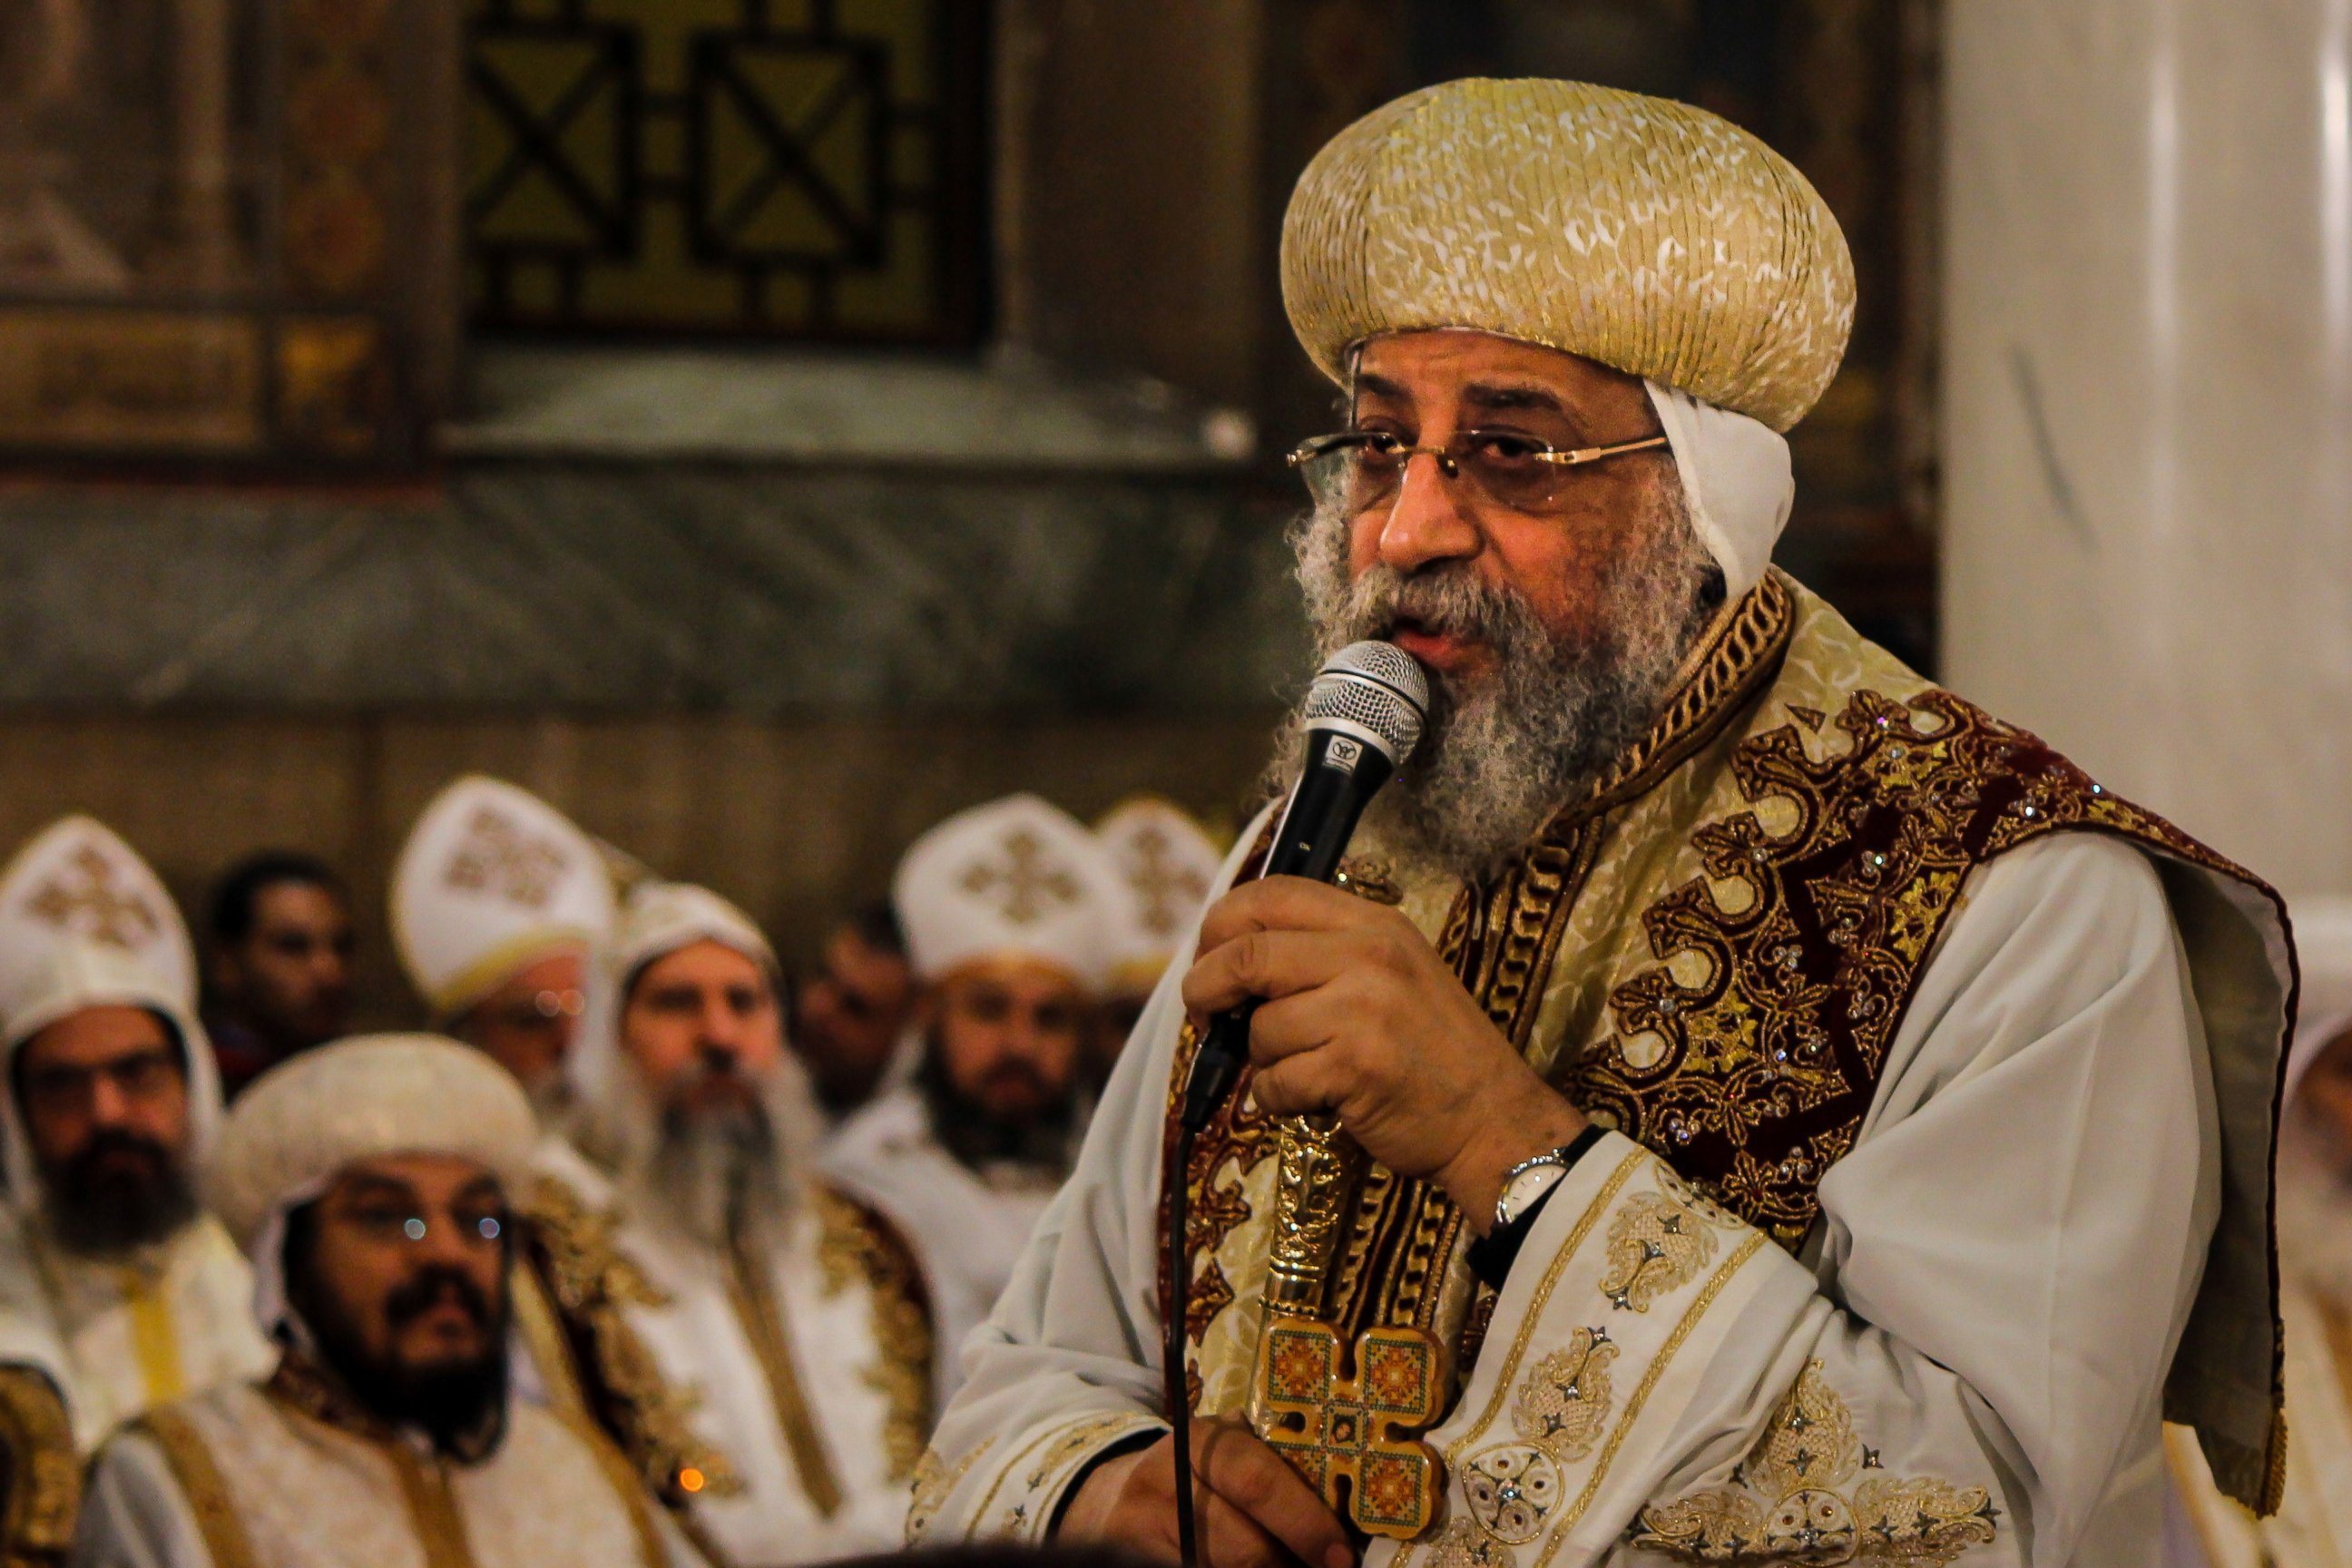 PHOTO: Coptic Pope Tawadros II officiates a mass in memory of the victims of the explosion at Saint Peter and Saint Paul Coptic Orthodox Church, on the 40th day after the attacks, at the Saint Peter and Saint Paul church in Cairo, Jan. 23, 2017.